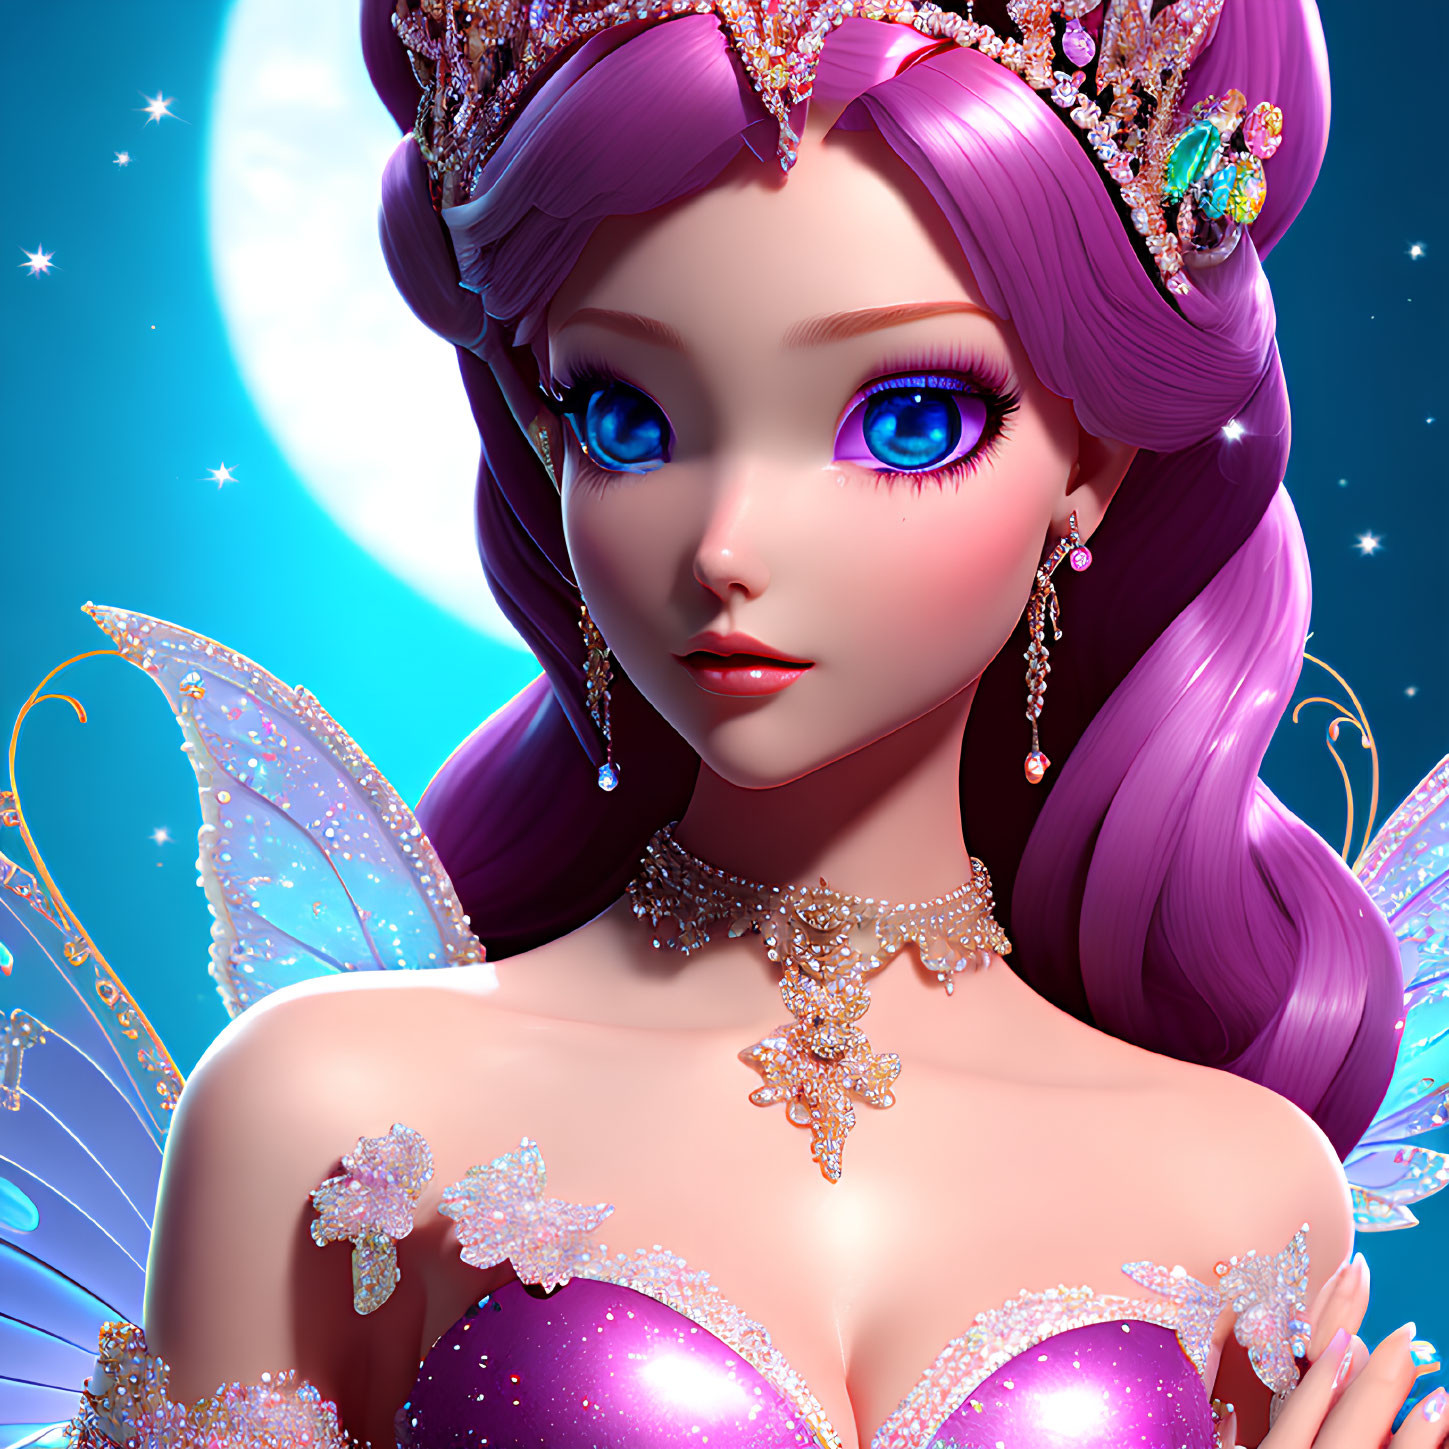 Fantasy fairy with violet hair and jeweled crown in moonlit setting